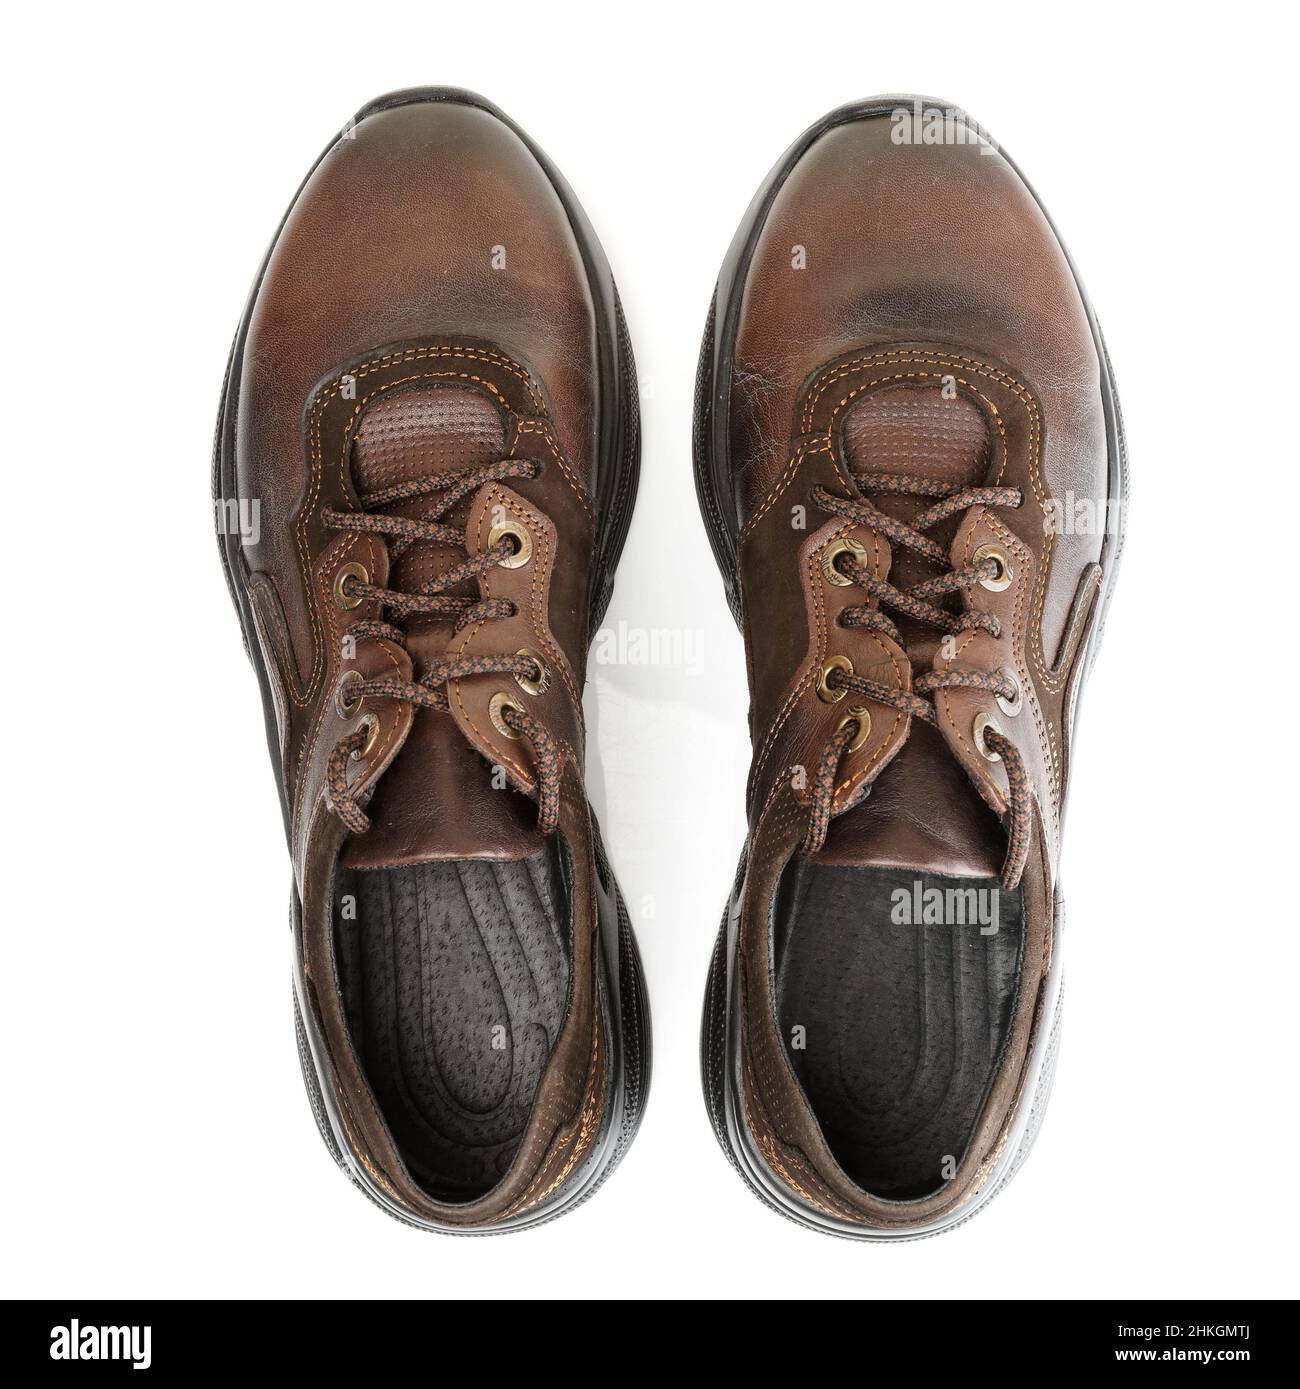 Pair of brown leather walking shoes on white background shot from above Stock Photo